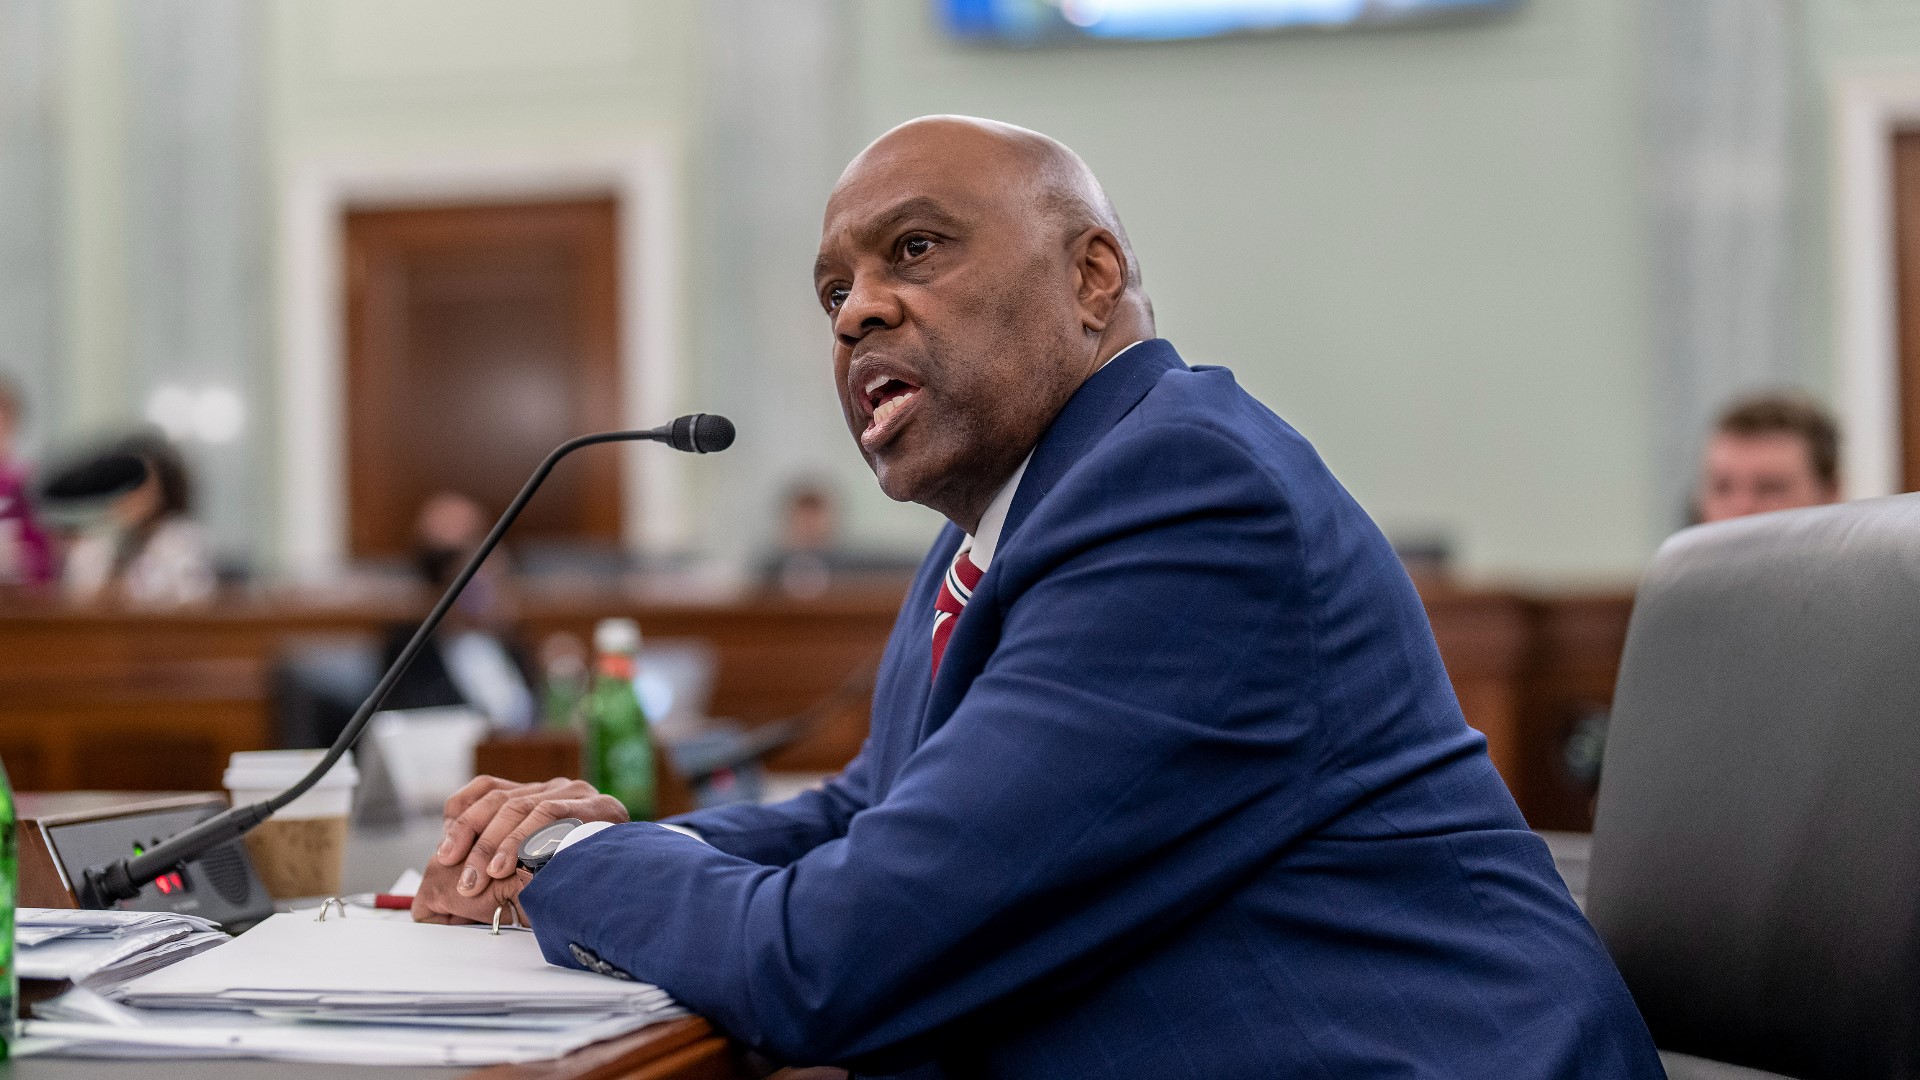 Republicans were united in opposition to Denver International Airport CEO Phillip Washington, calling him unqualified because of limited aviation experience.